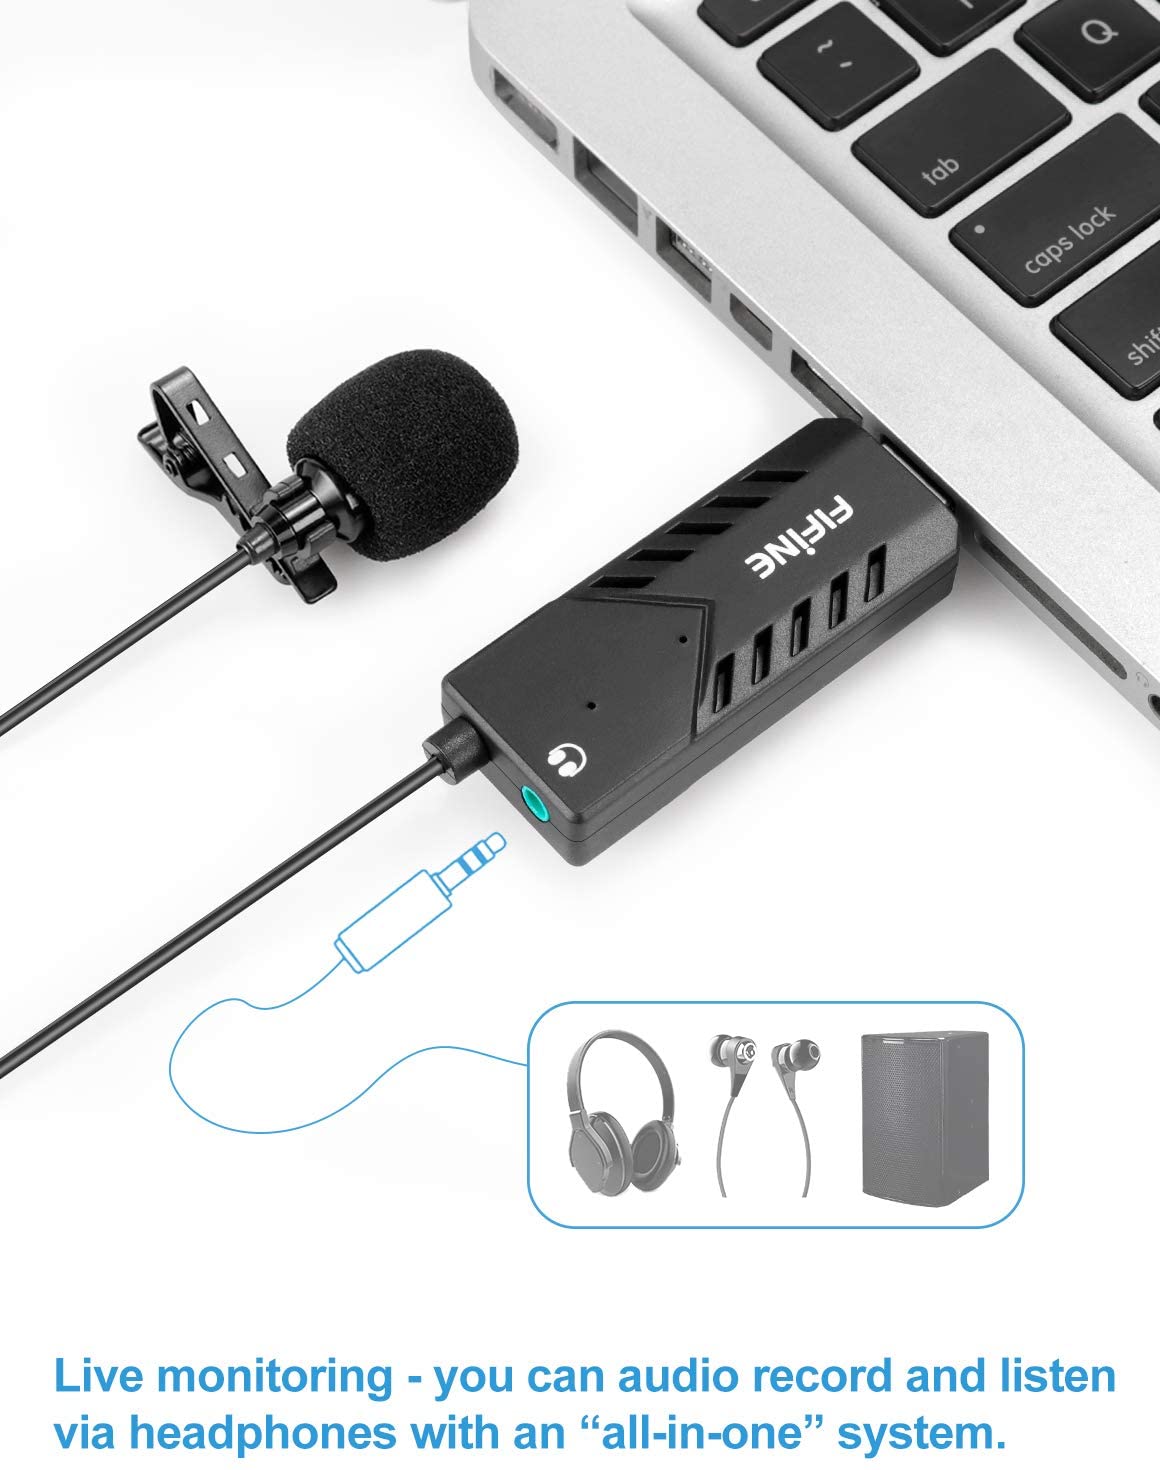 FIFINE K053 USB Lavalier Lapel Microphone Clip-on Cardioid Condenser Computer mic Plug and Play USB Microphone with Sound Card for PC and Mac